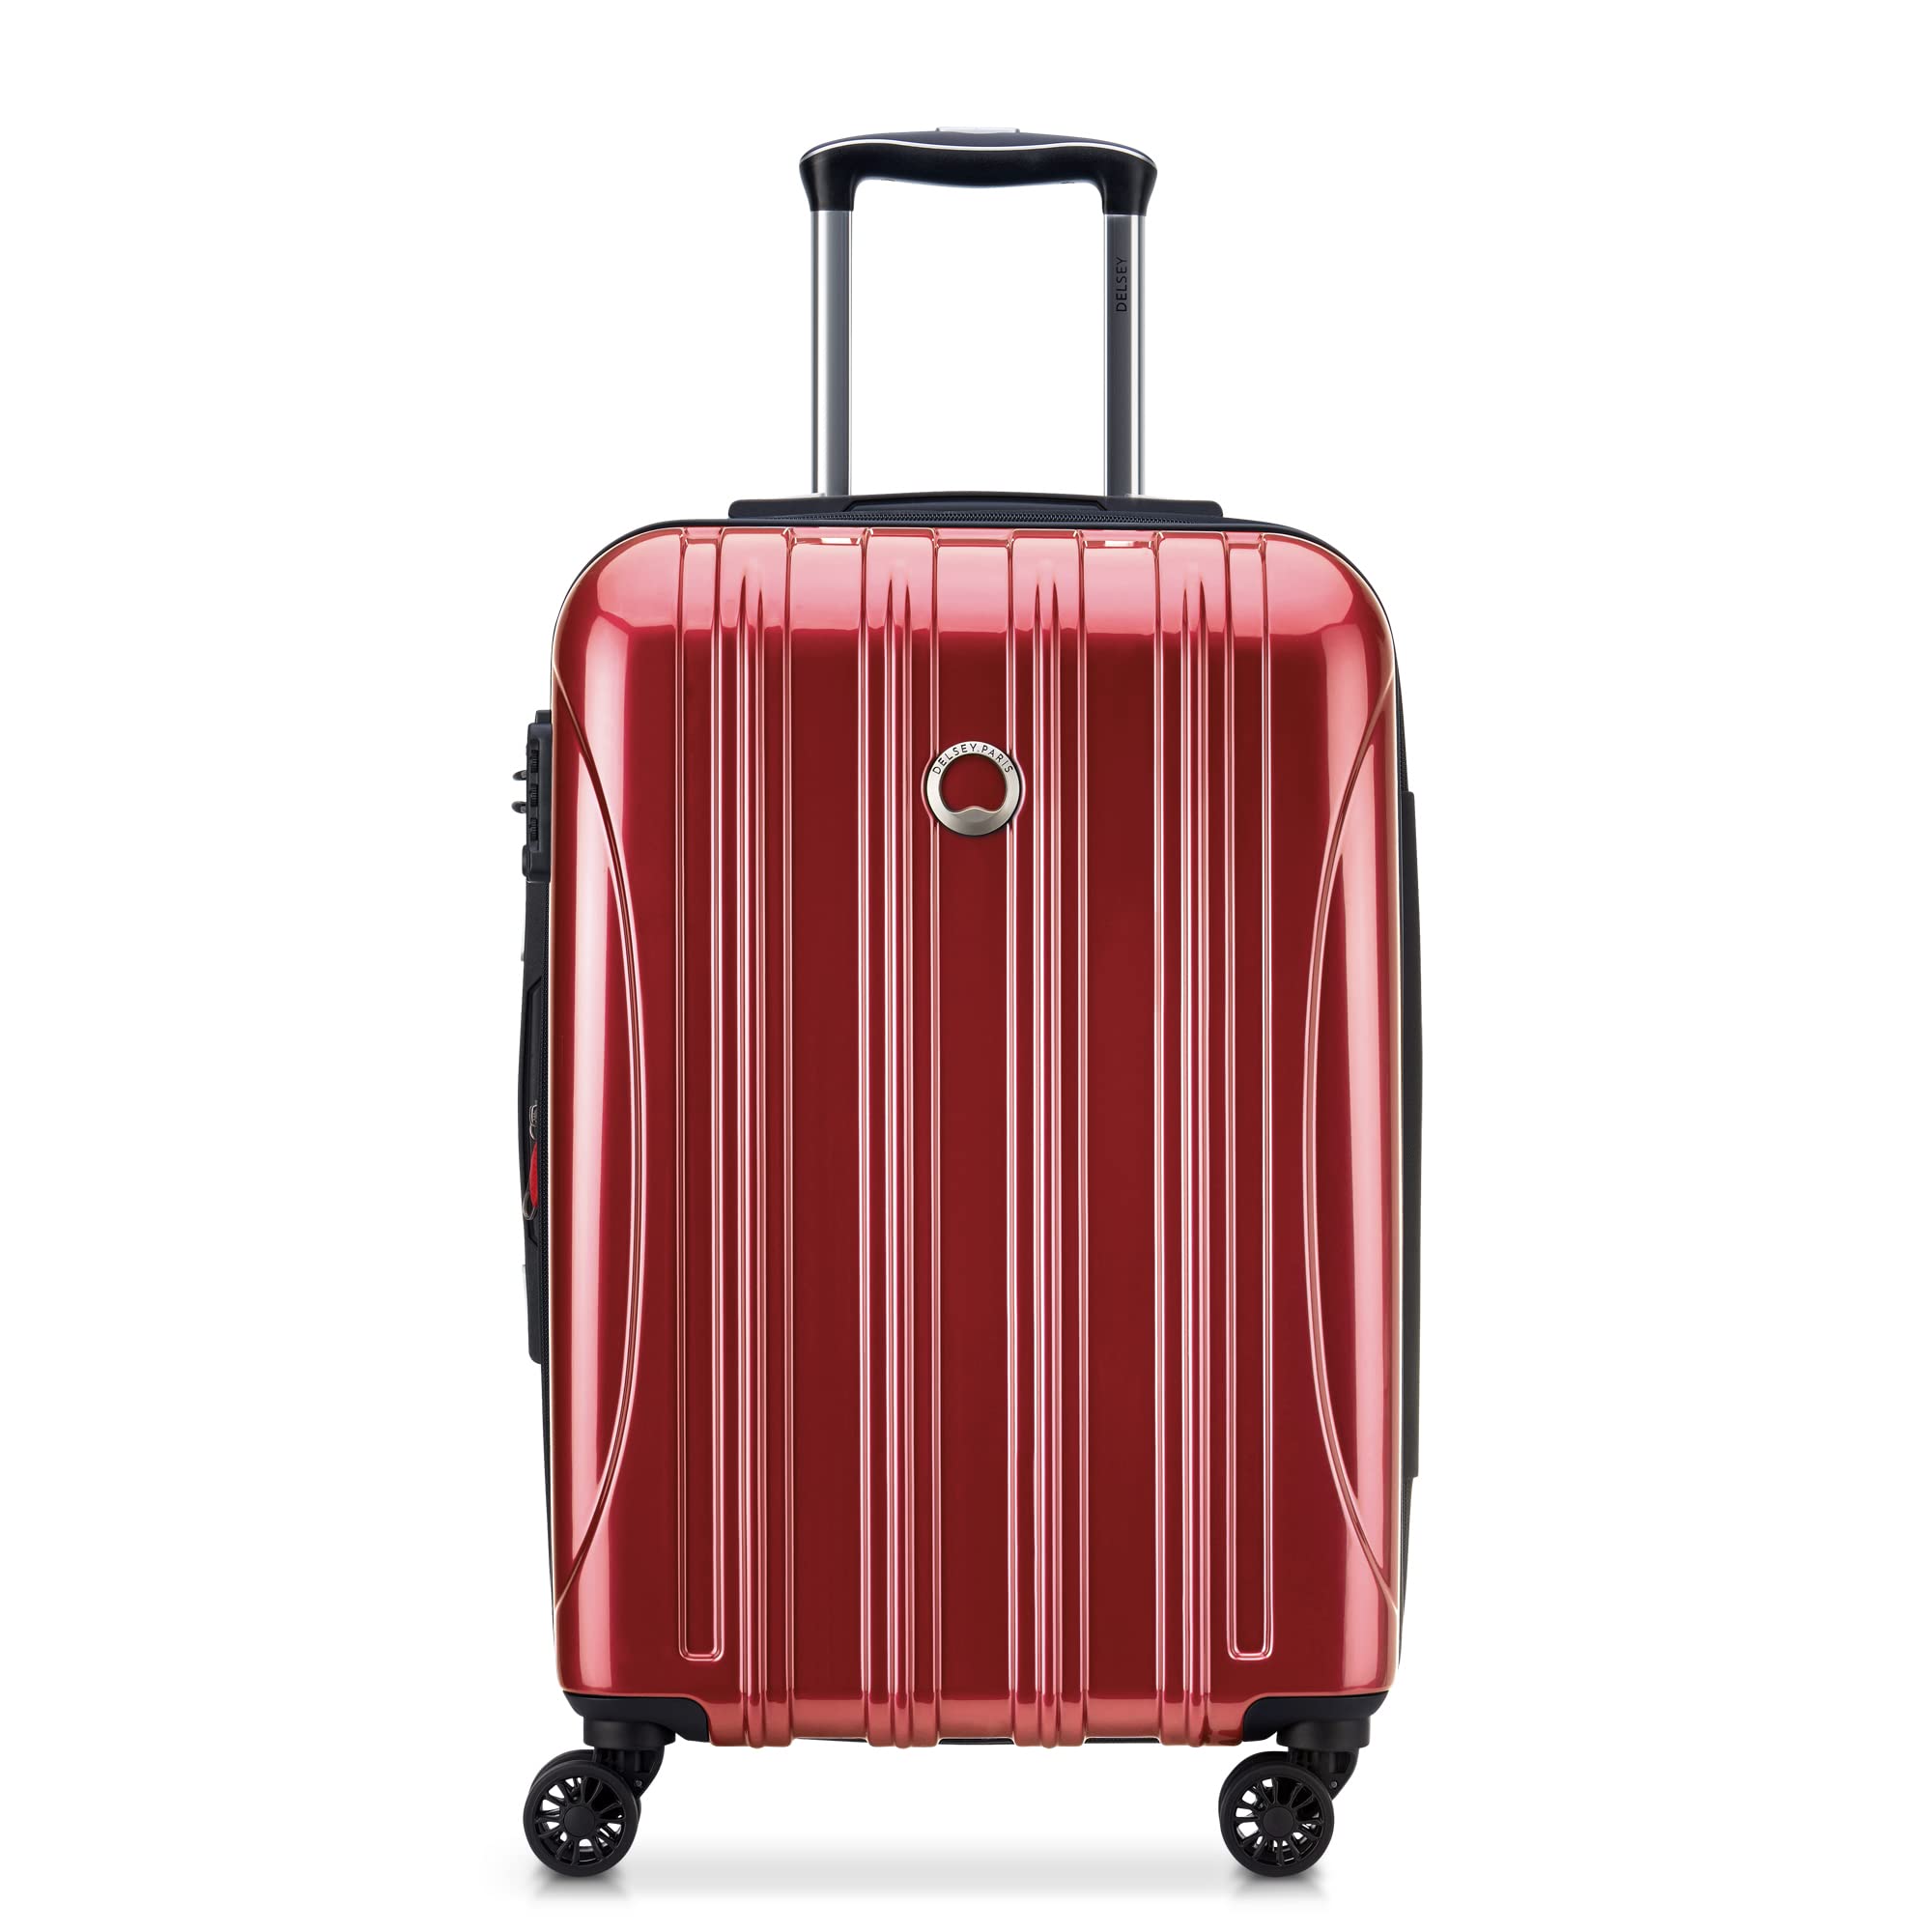 DELSEY Paris Helium Aero Hardside Expandable Luggage with Spinner Wheels, Brick Red, Carry-On 21 Inch - $98